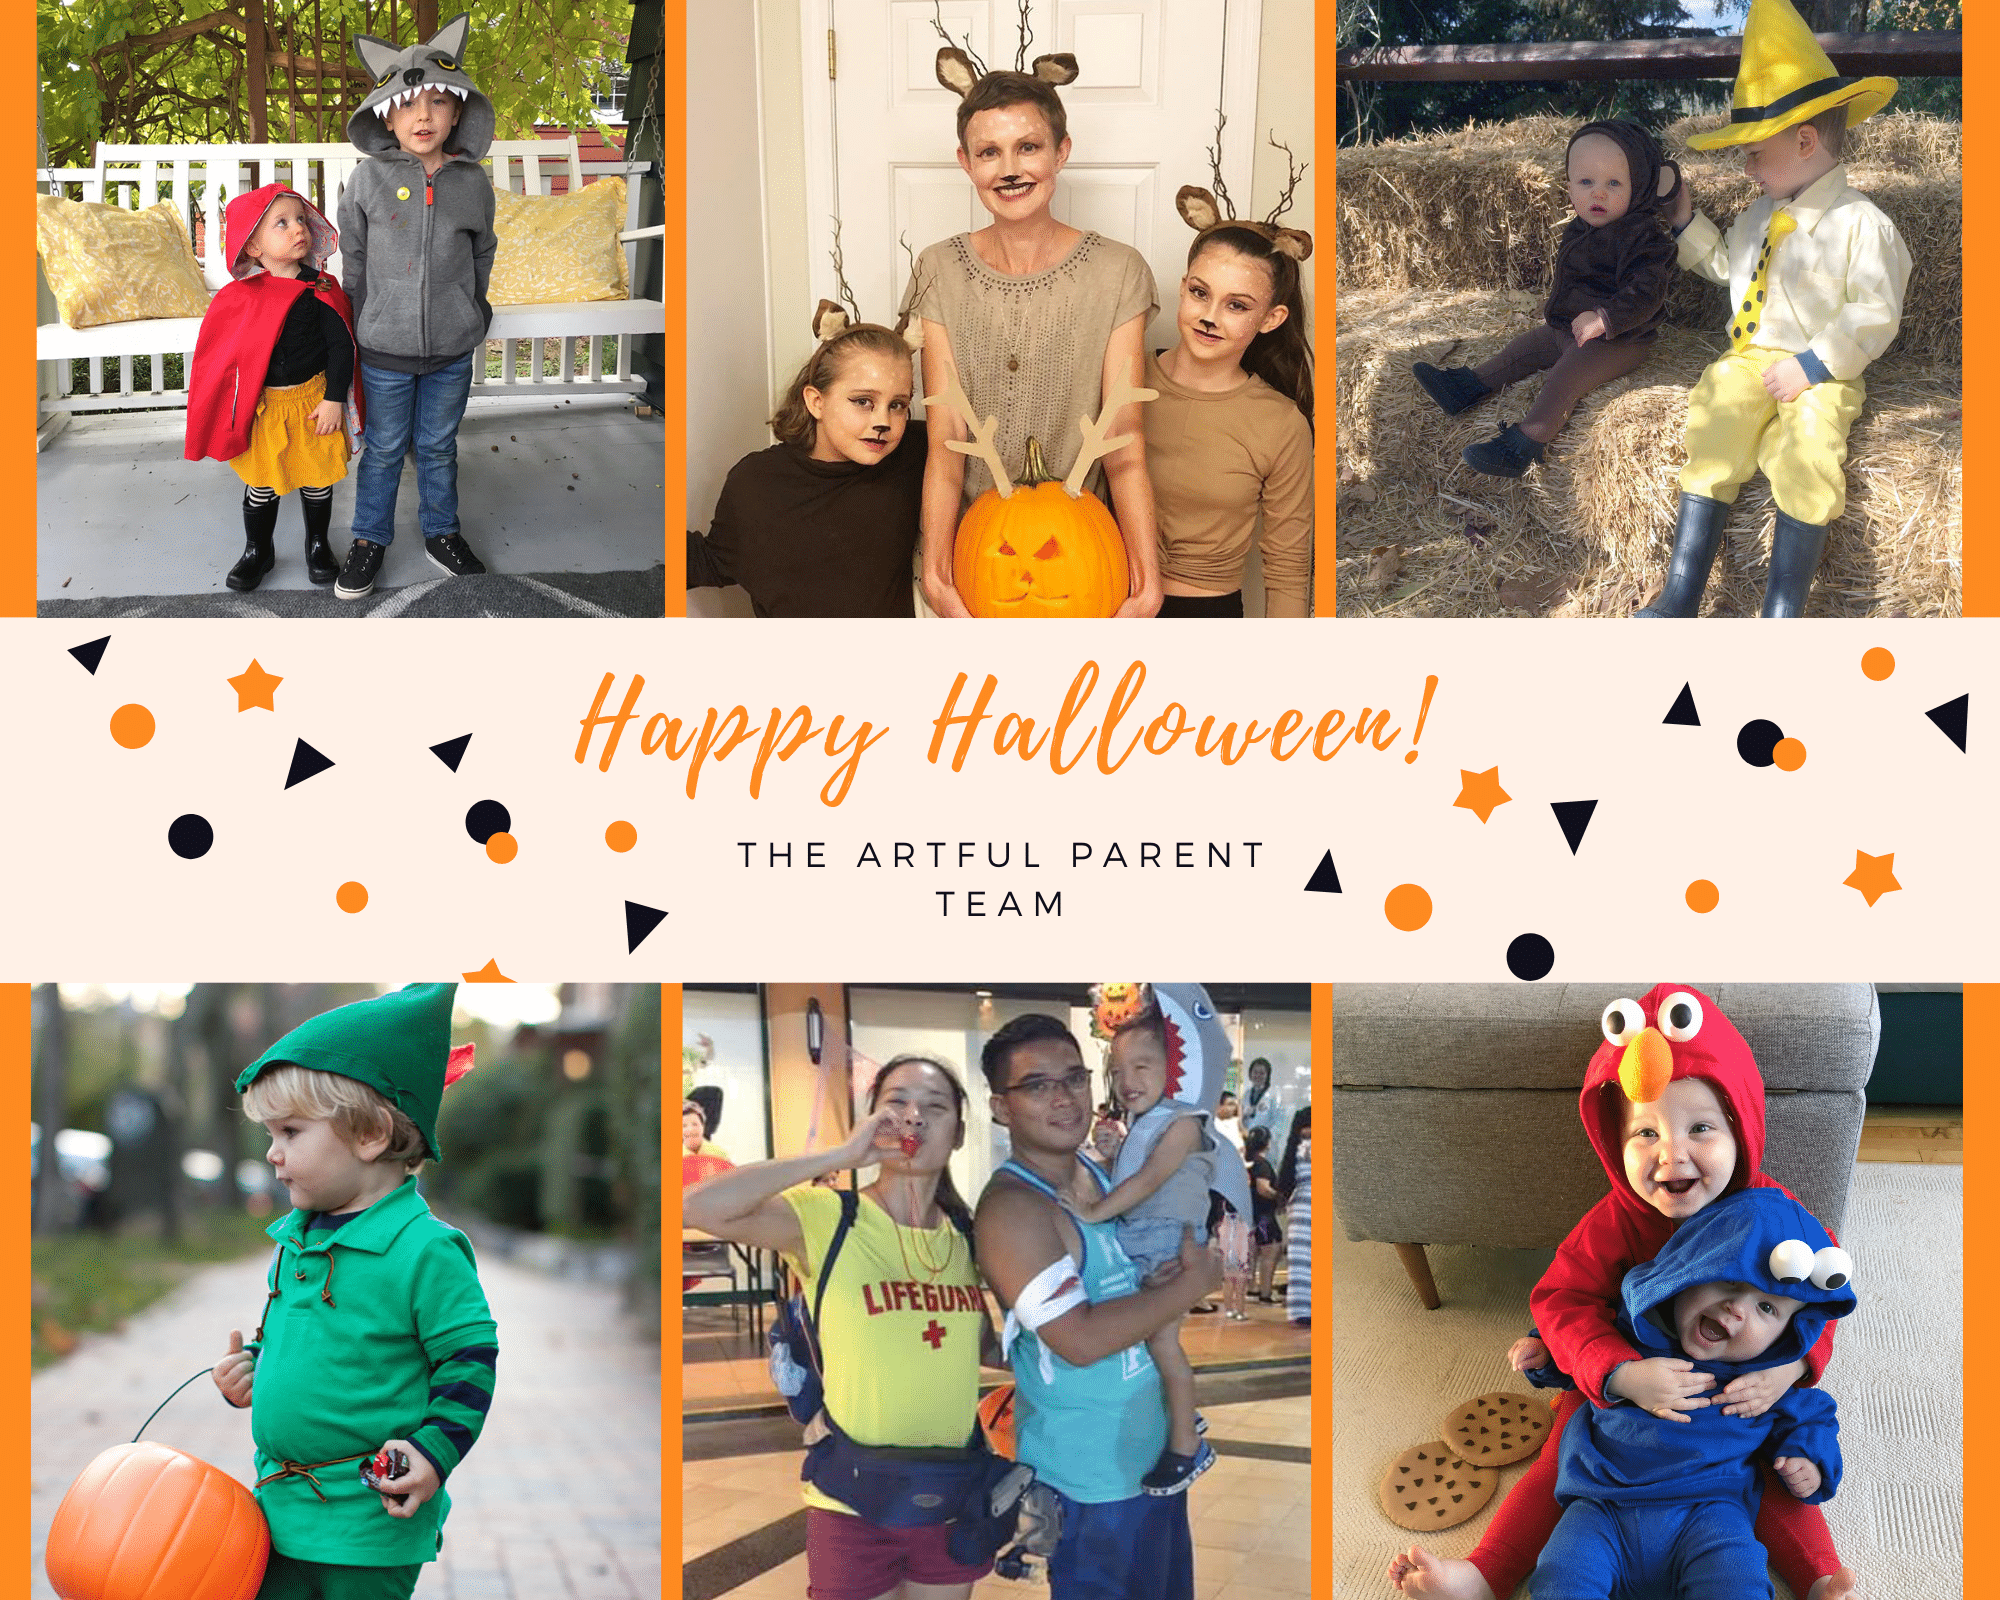 DIY Halloween costumes for kids from The Artful Parent team. 